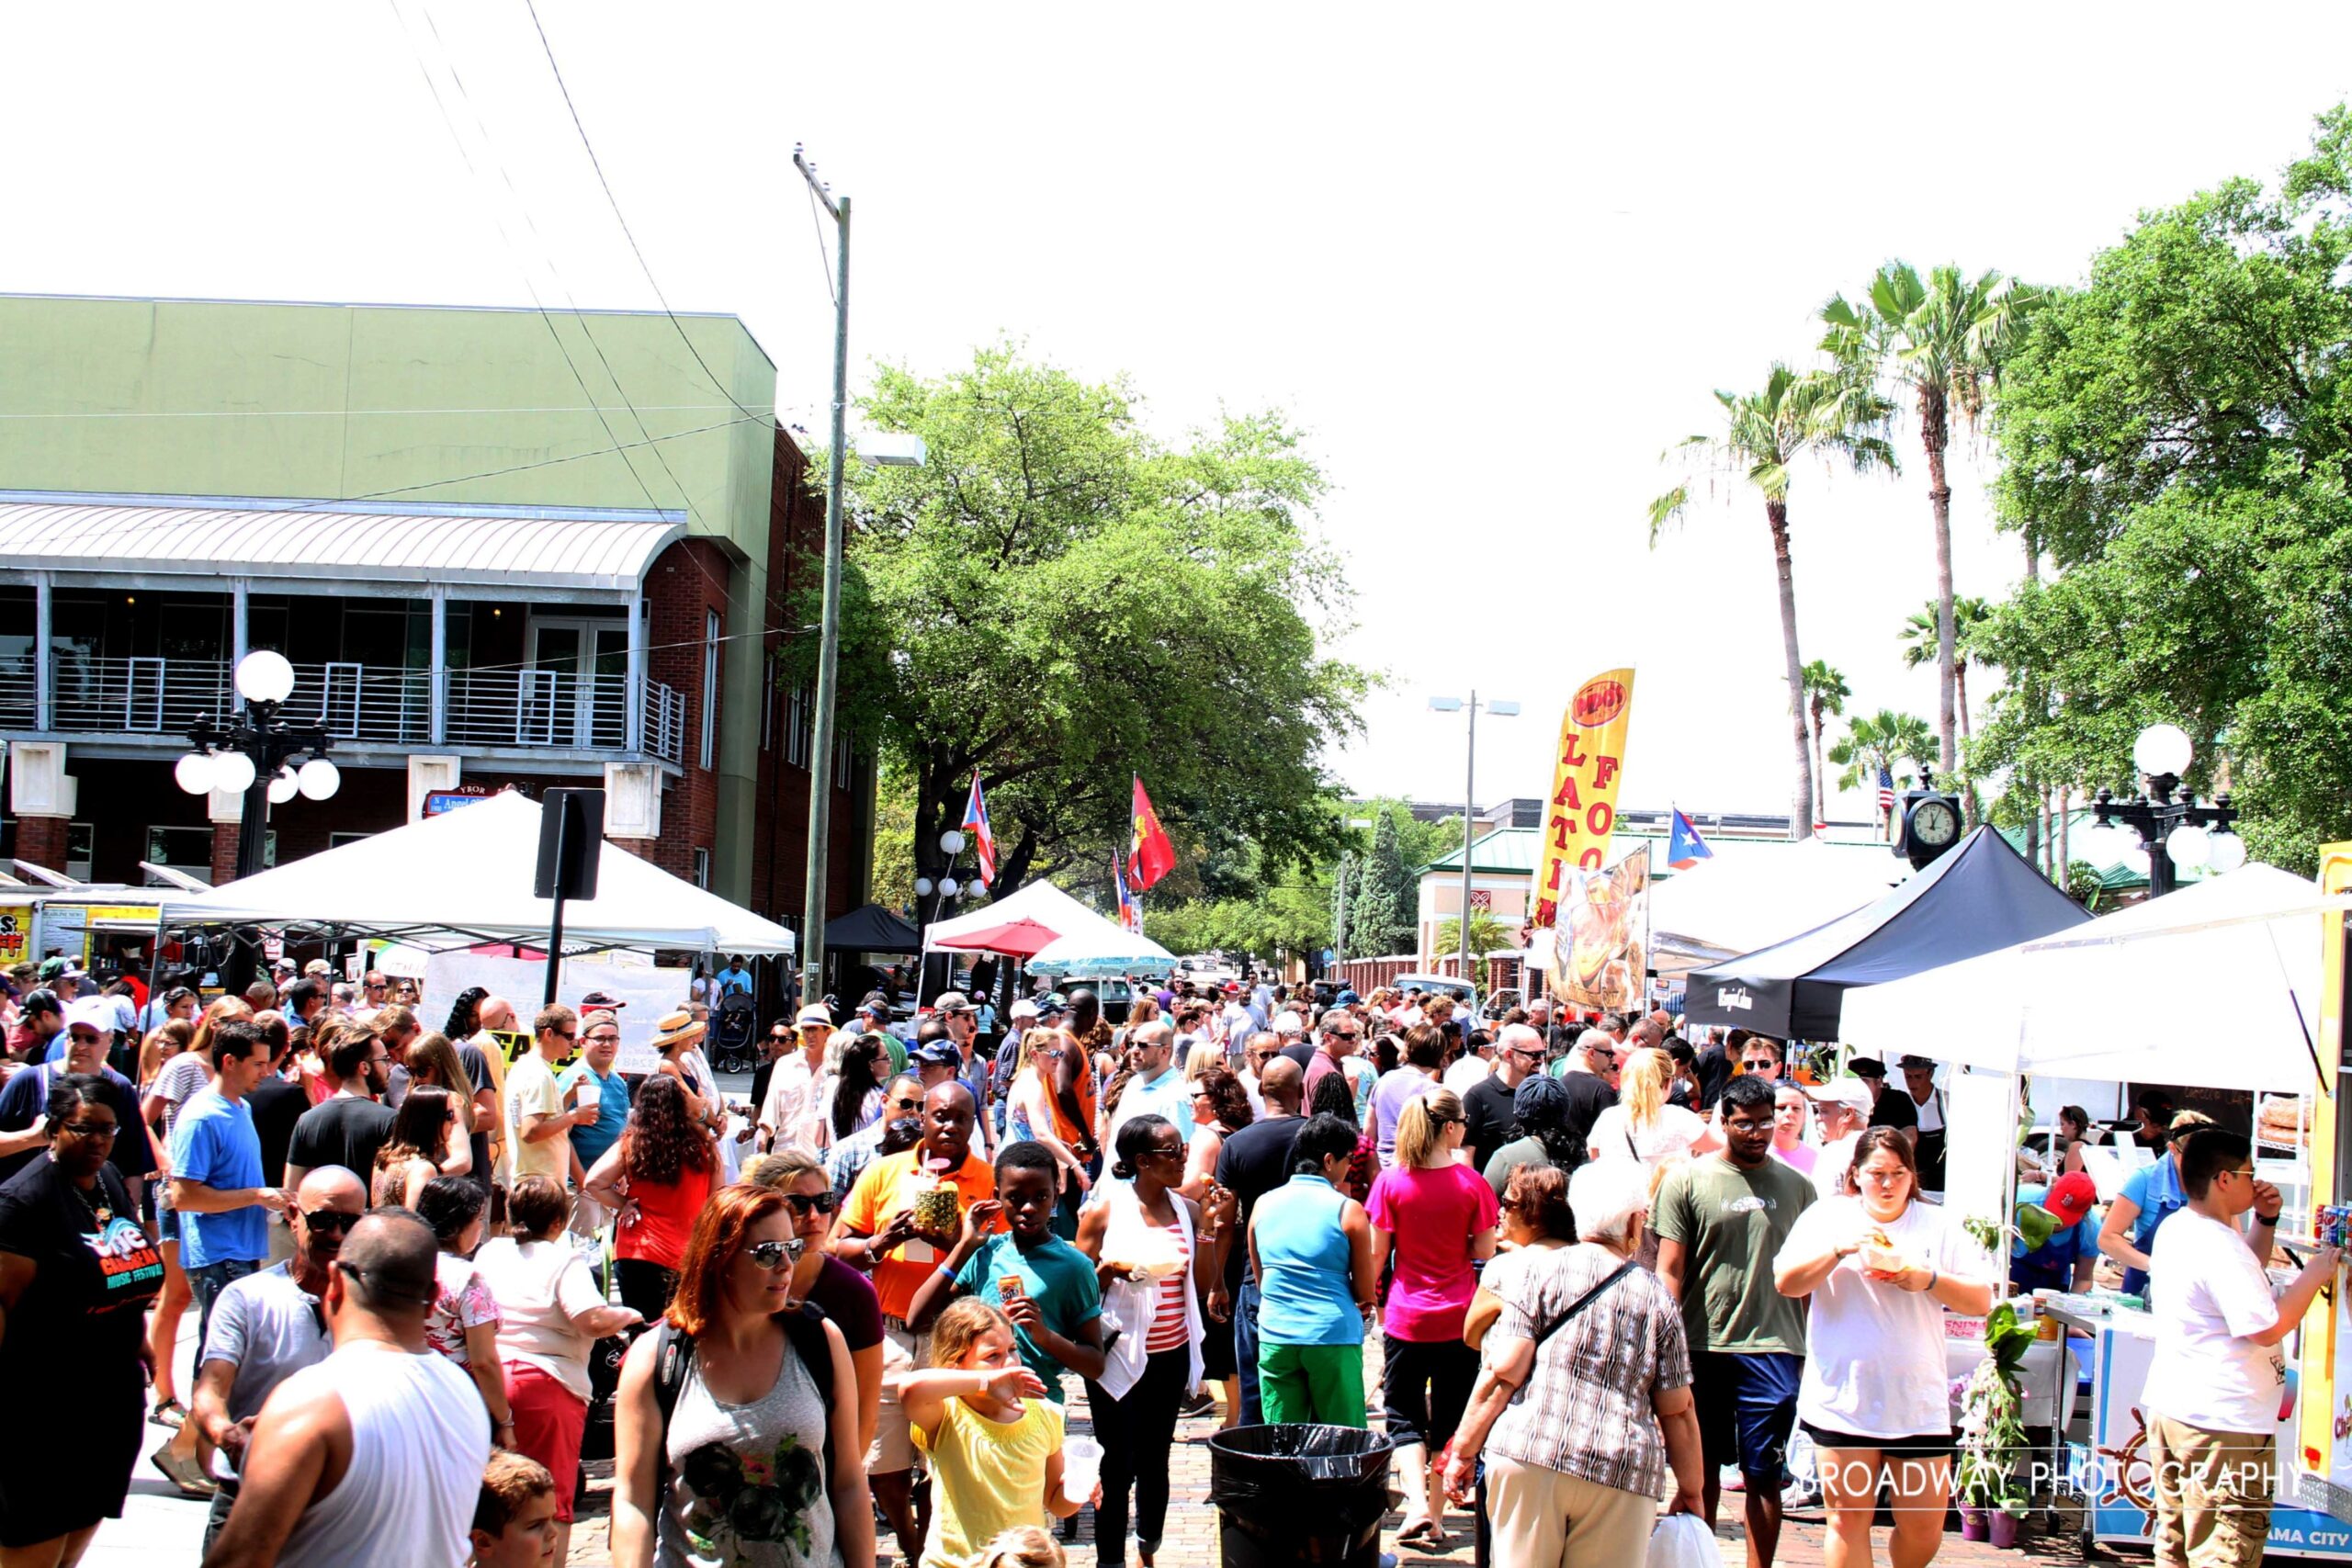 Historic Ybor City comes alive in October with the Taste of Latino Festival